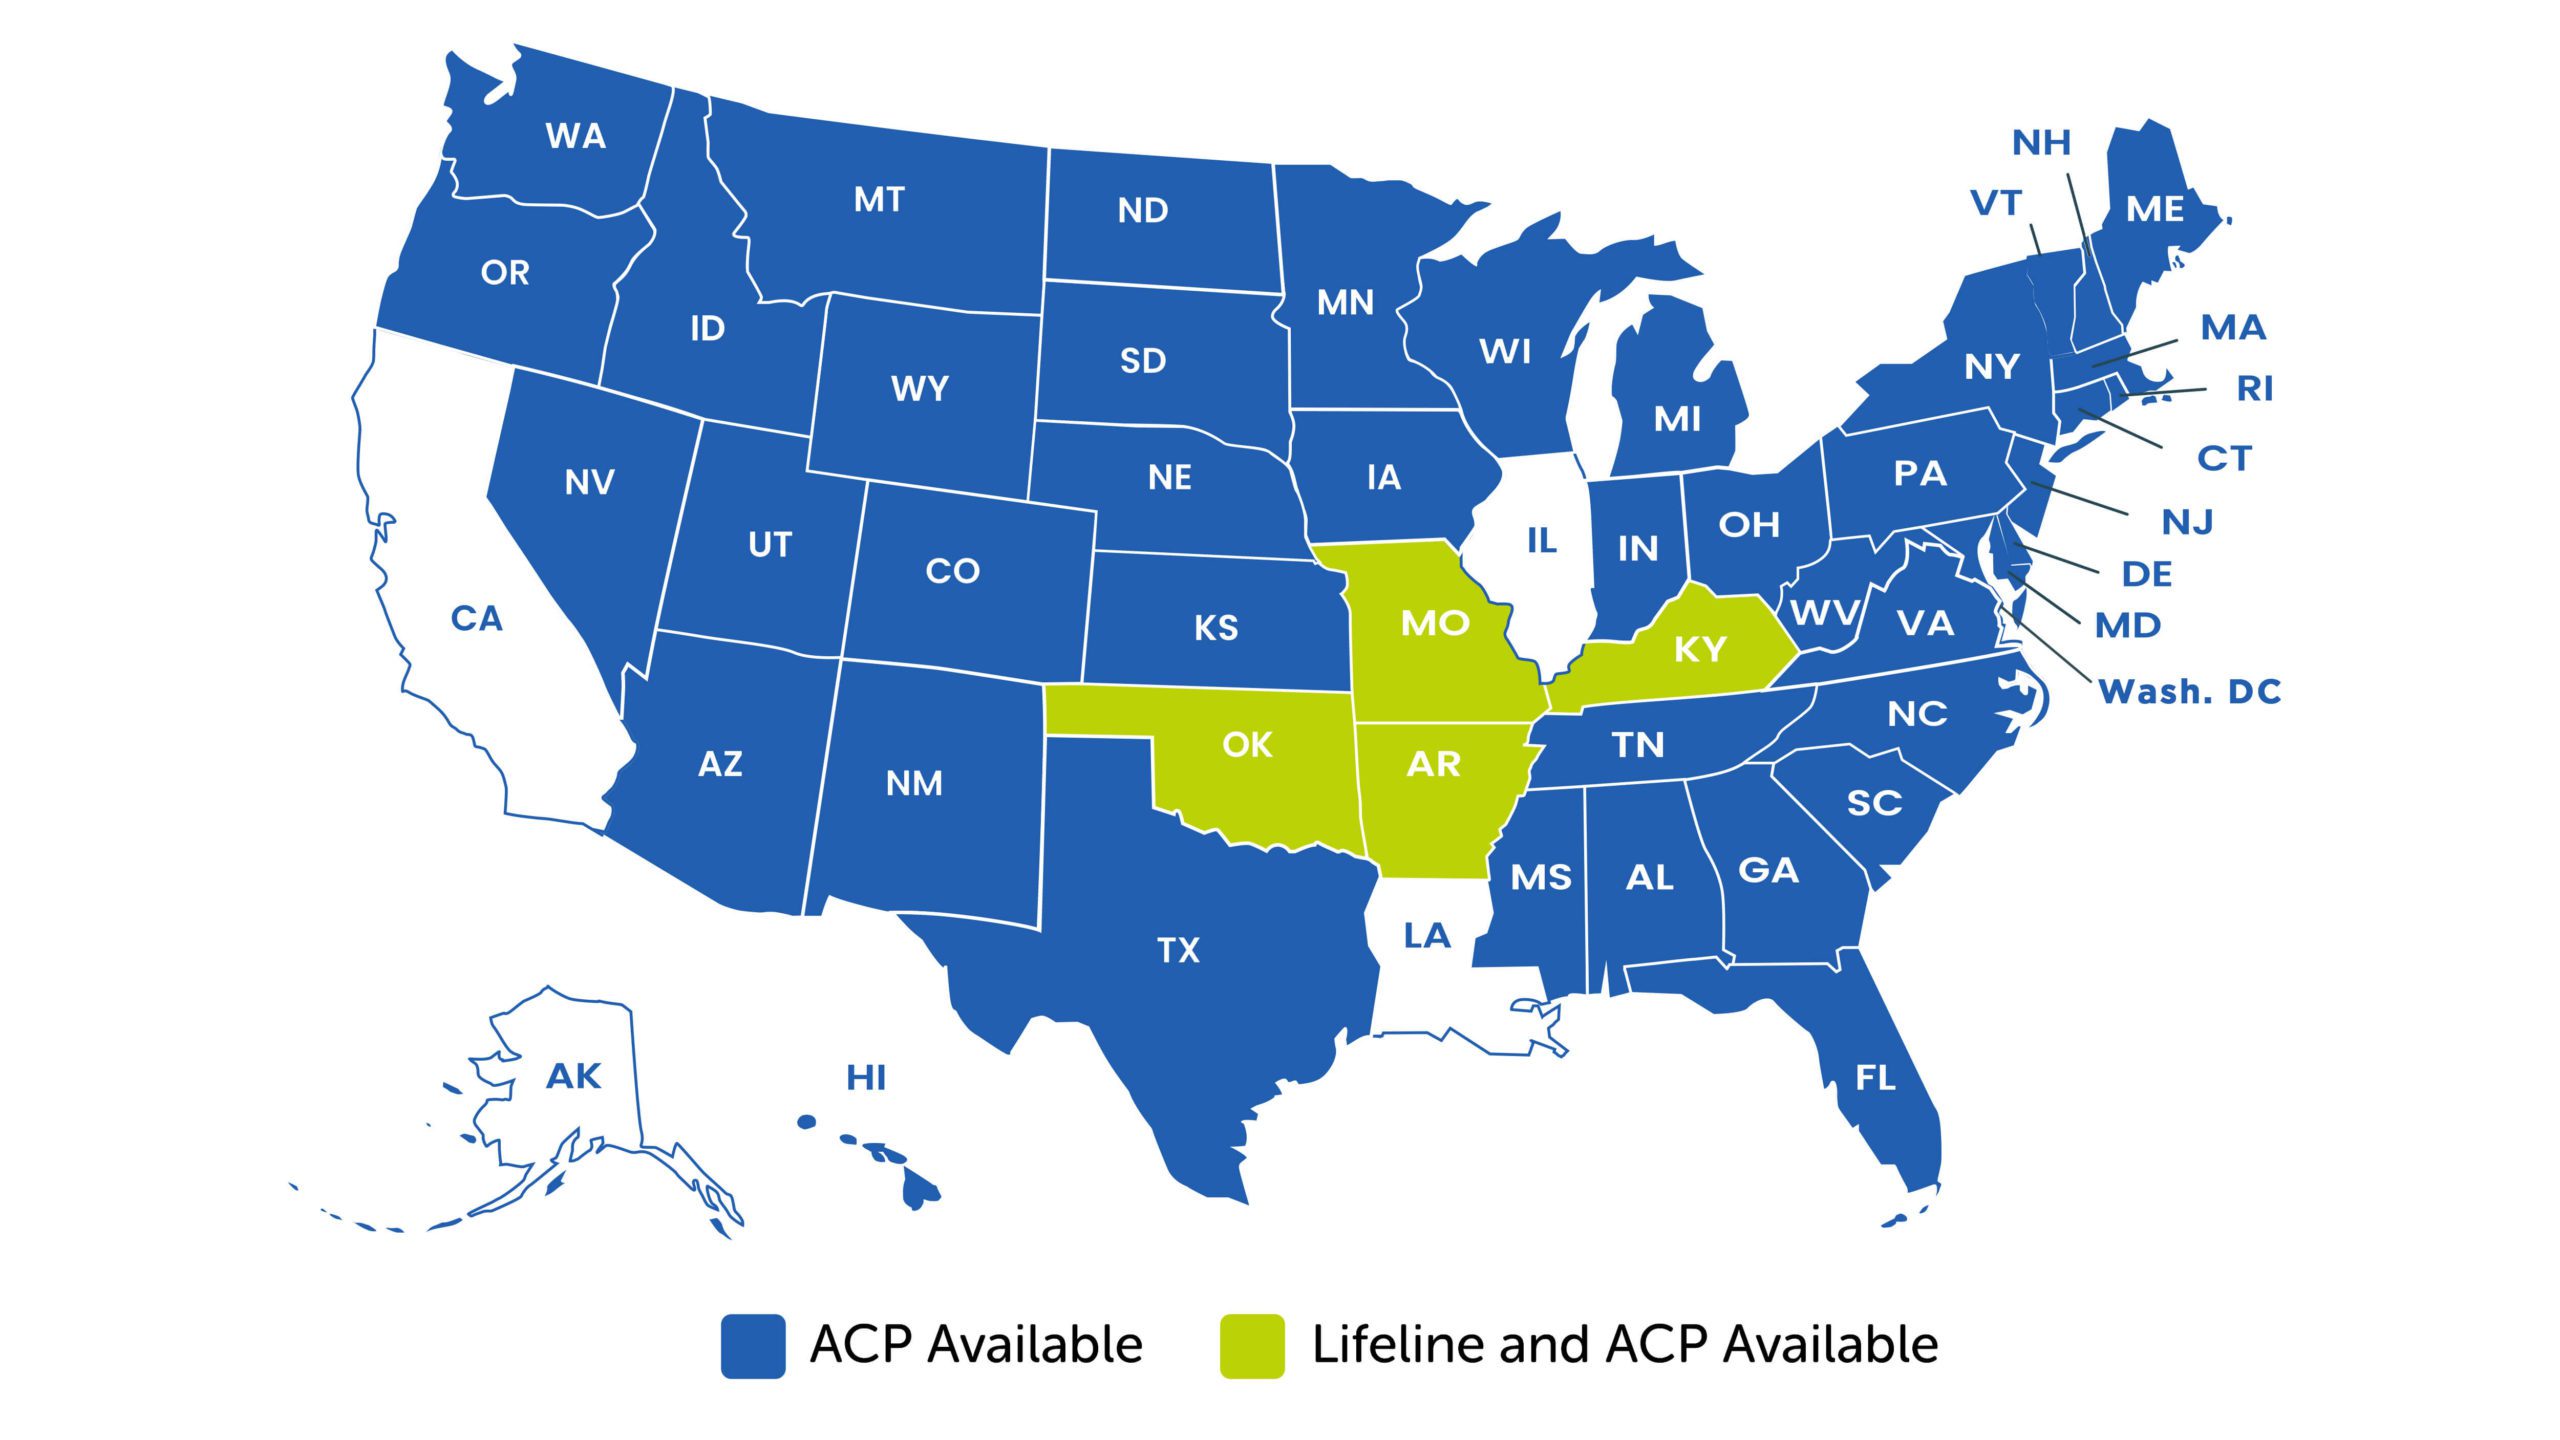 In Which States Is Easy Wireless ACP Offered?